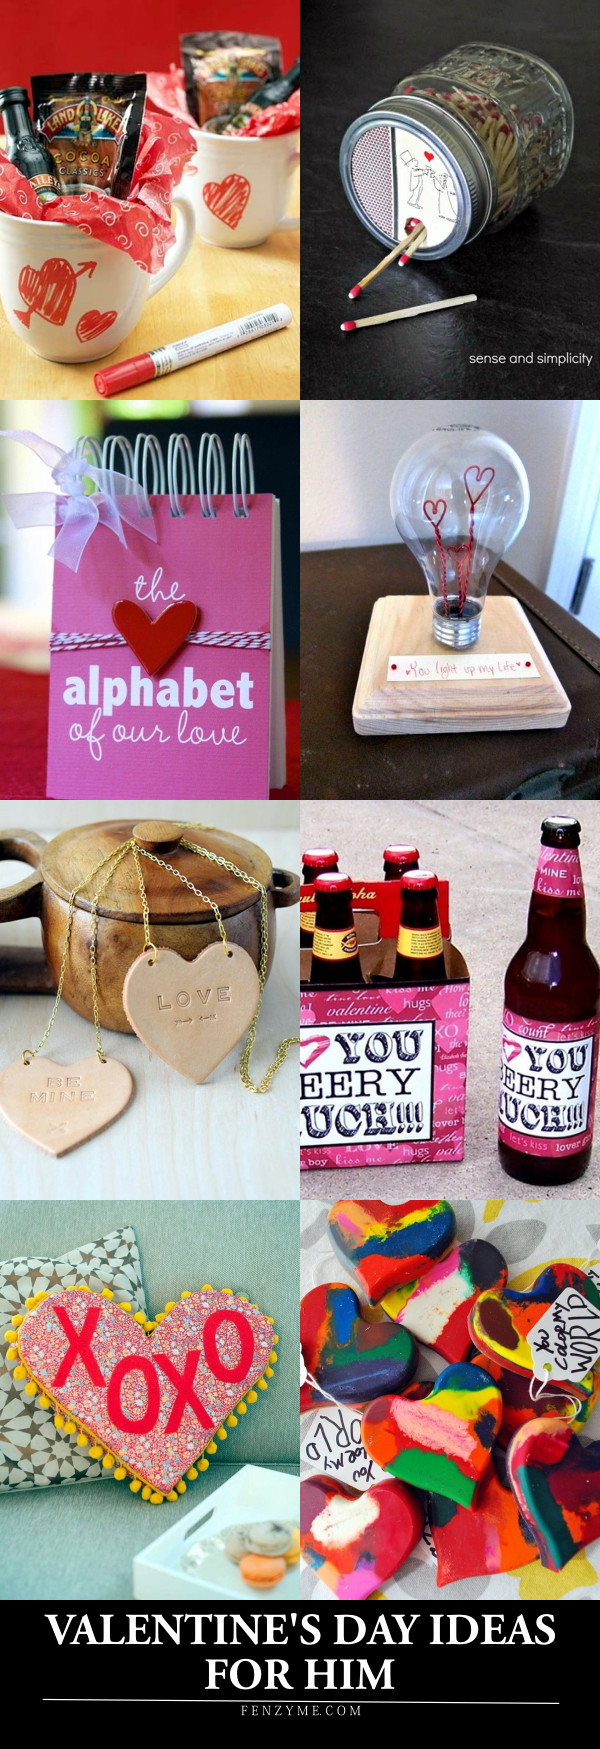 First Valentine'S Day Gift Ideas For Him
 101 Homemade Valentines Day Ideas for Him that re really CUTE